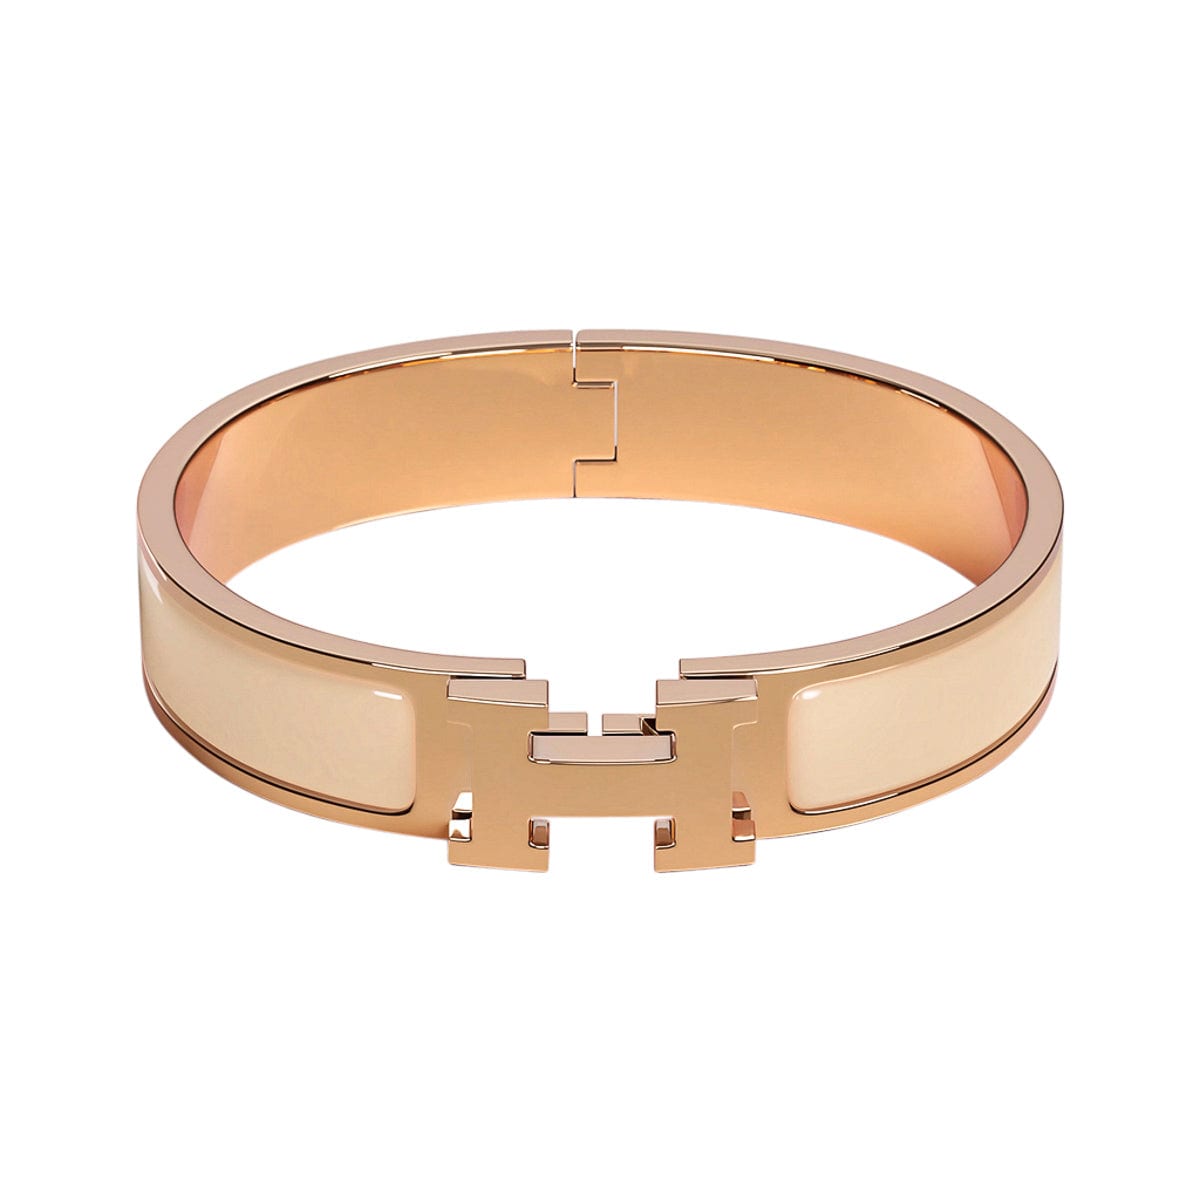 Hermes Clic H Bracelet Creme Enamel with Rose Gold Size Small